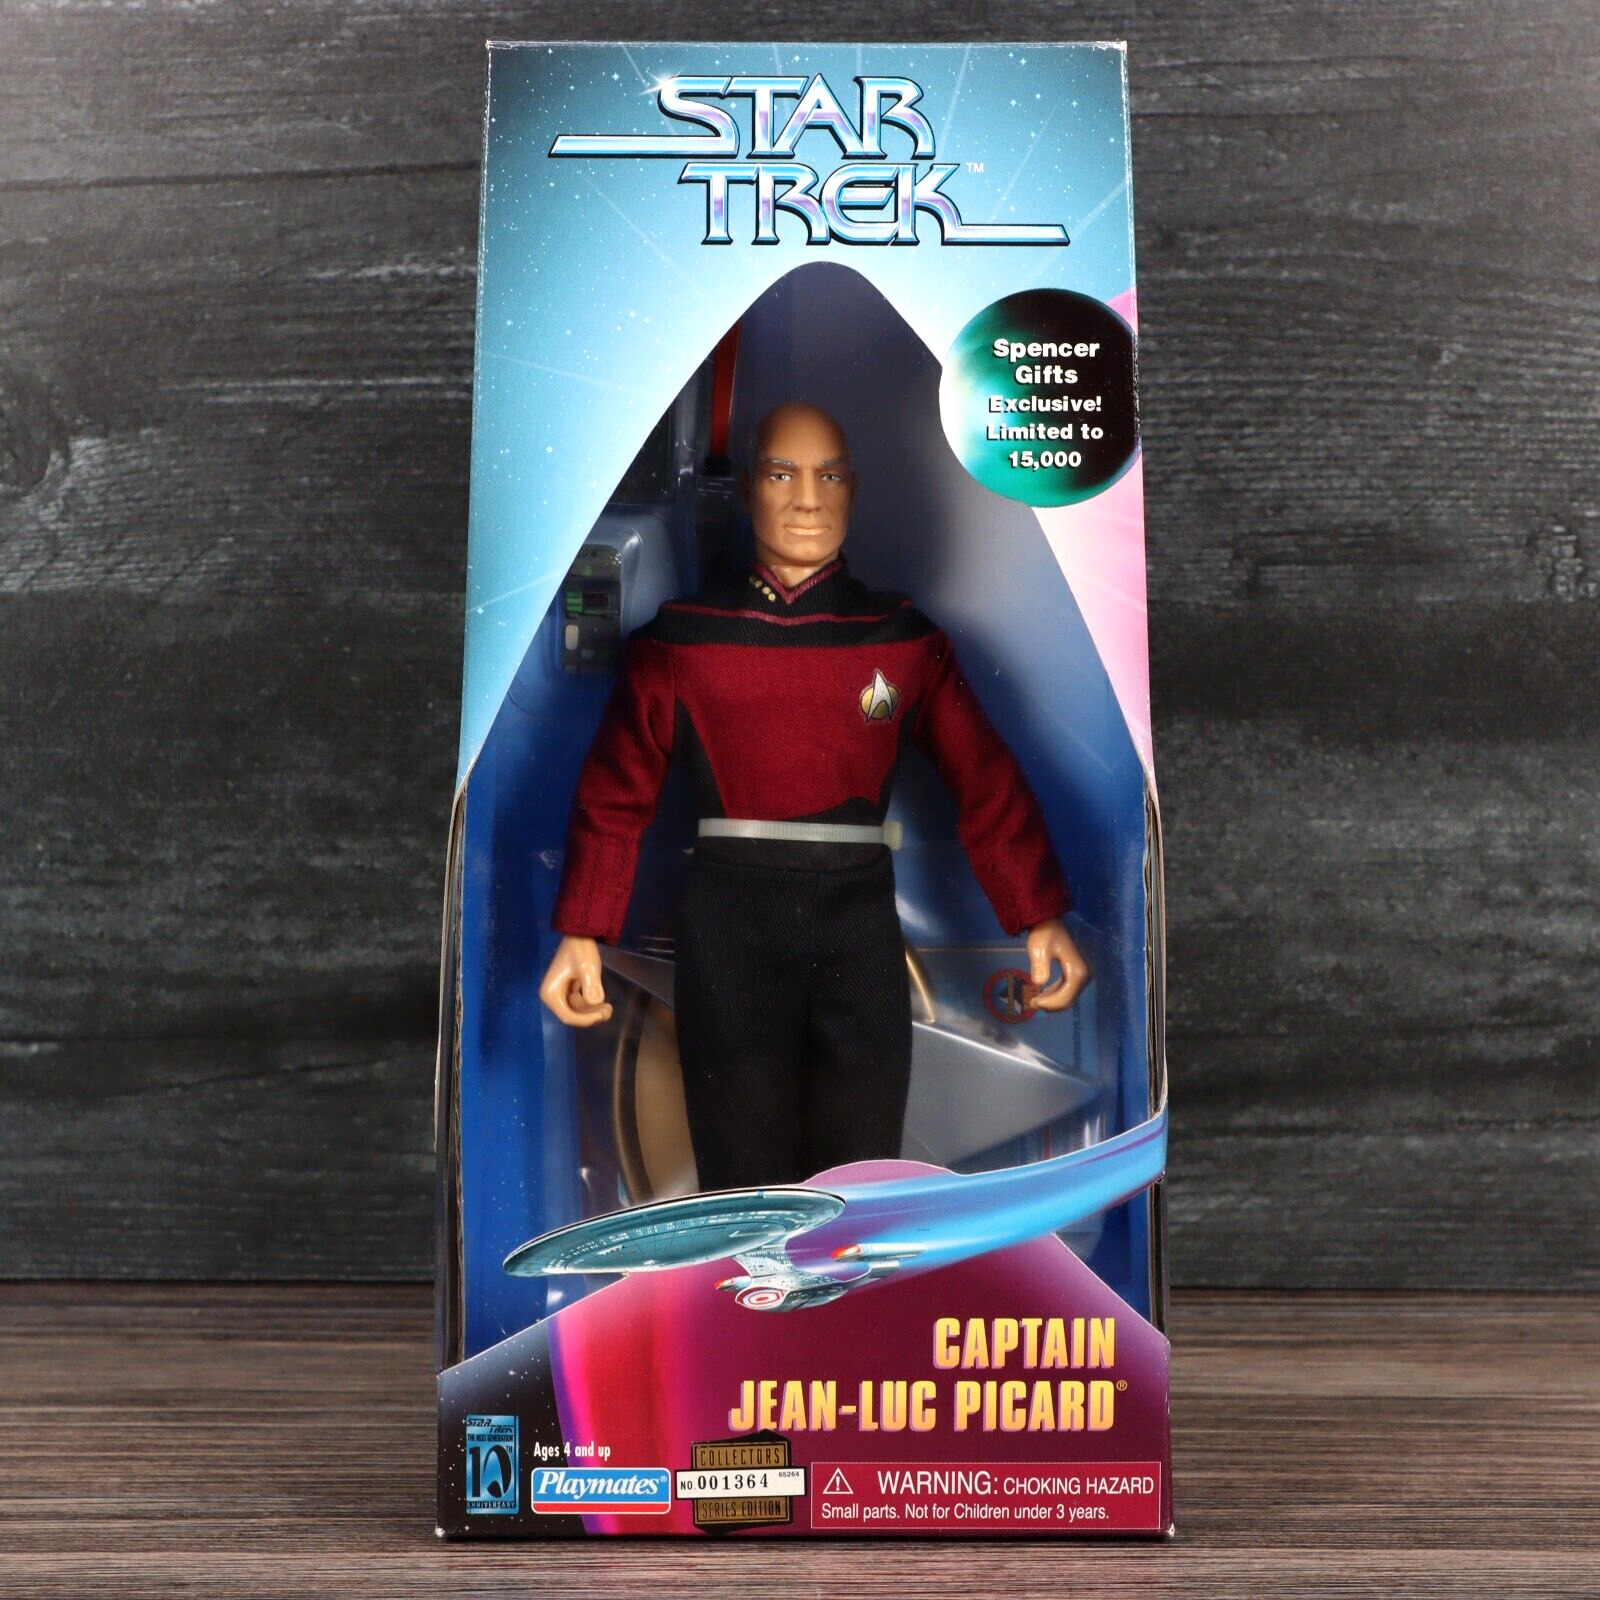 Star Trek TNG Captain Jean-Luc Picard Figure Spencer Gifts LE Playmates 1997